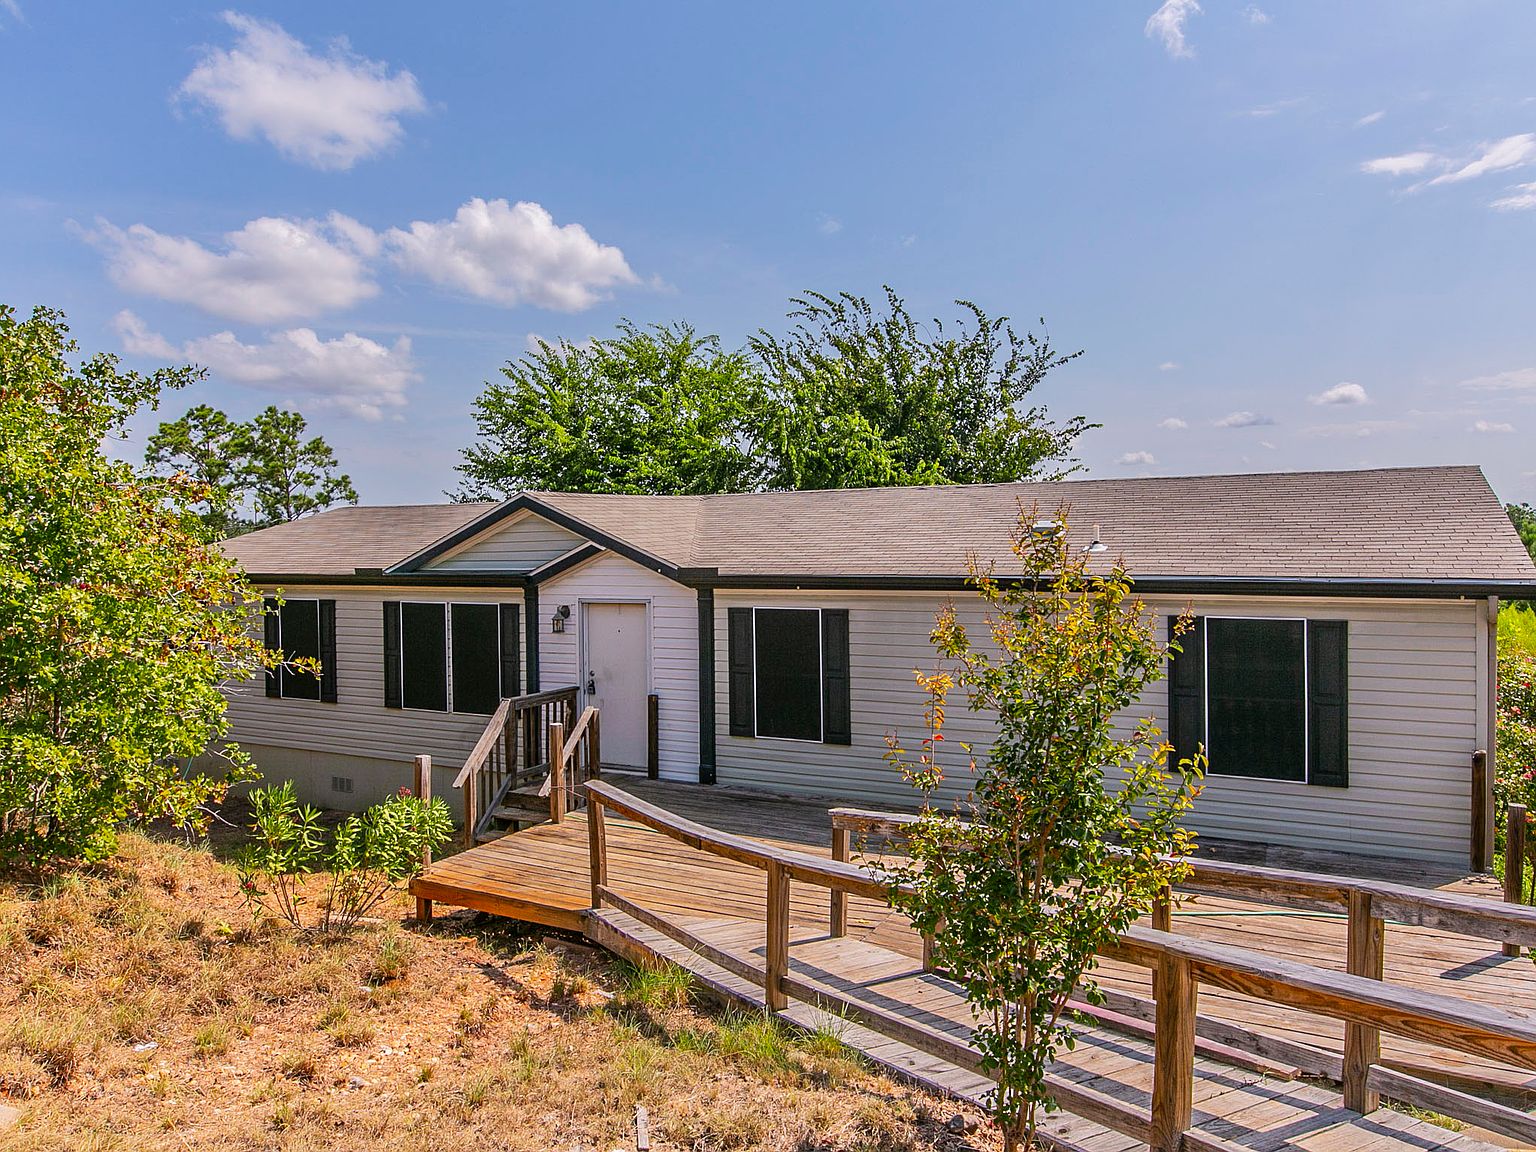 219 Lakeside Dr Bastrop Tx 78602 Zillow